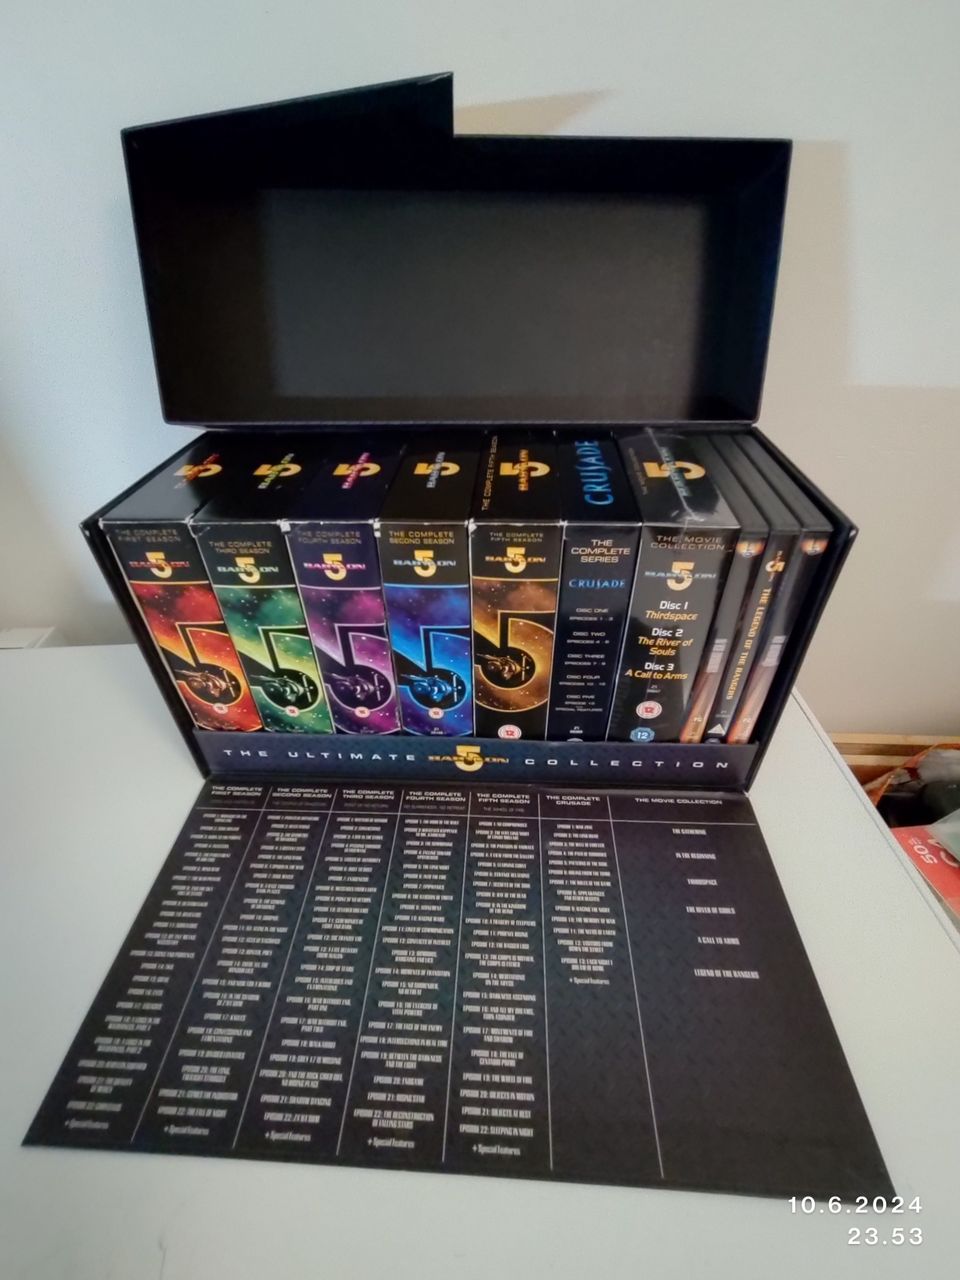 Babylon 5 Ultimate Collection DVD box